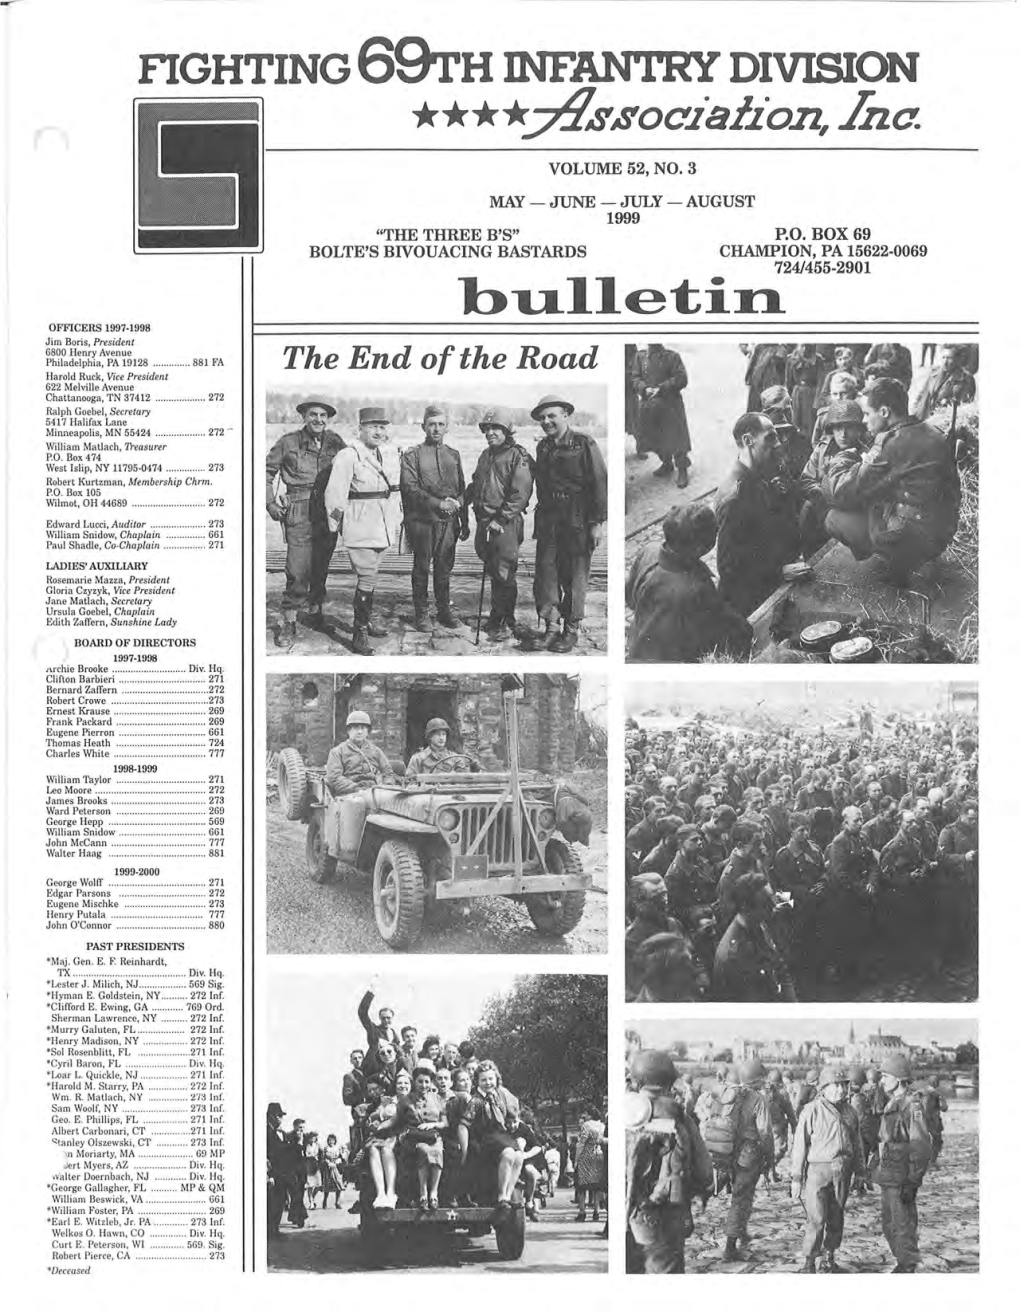 The Fighting 69Th Infantry Division Association, Inc. Vol. 52 No. 3 May